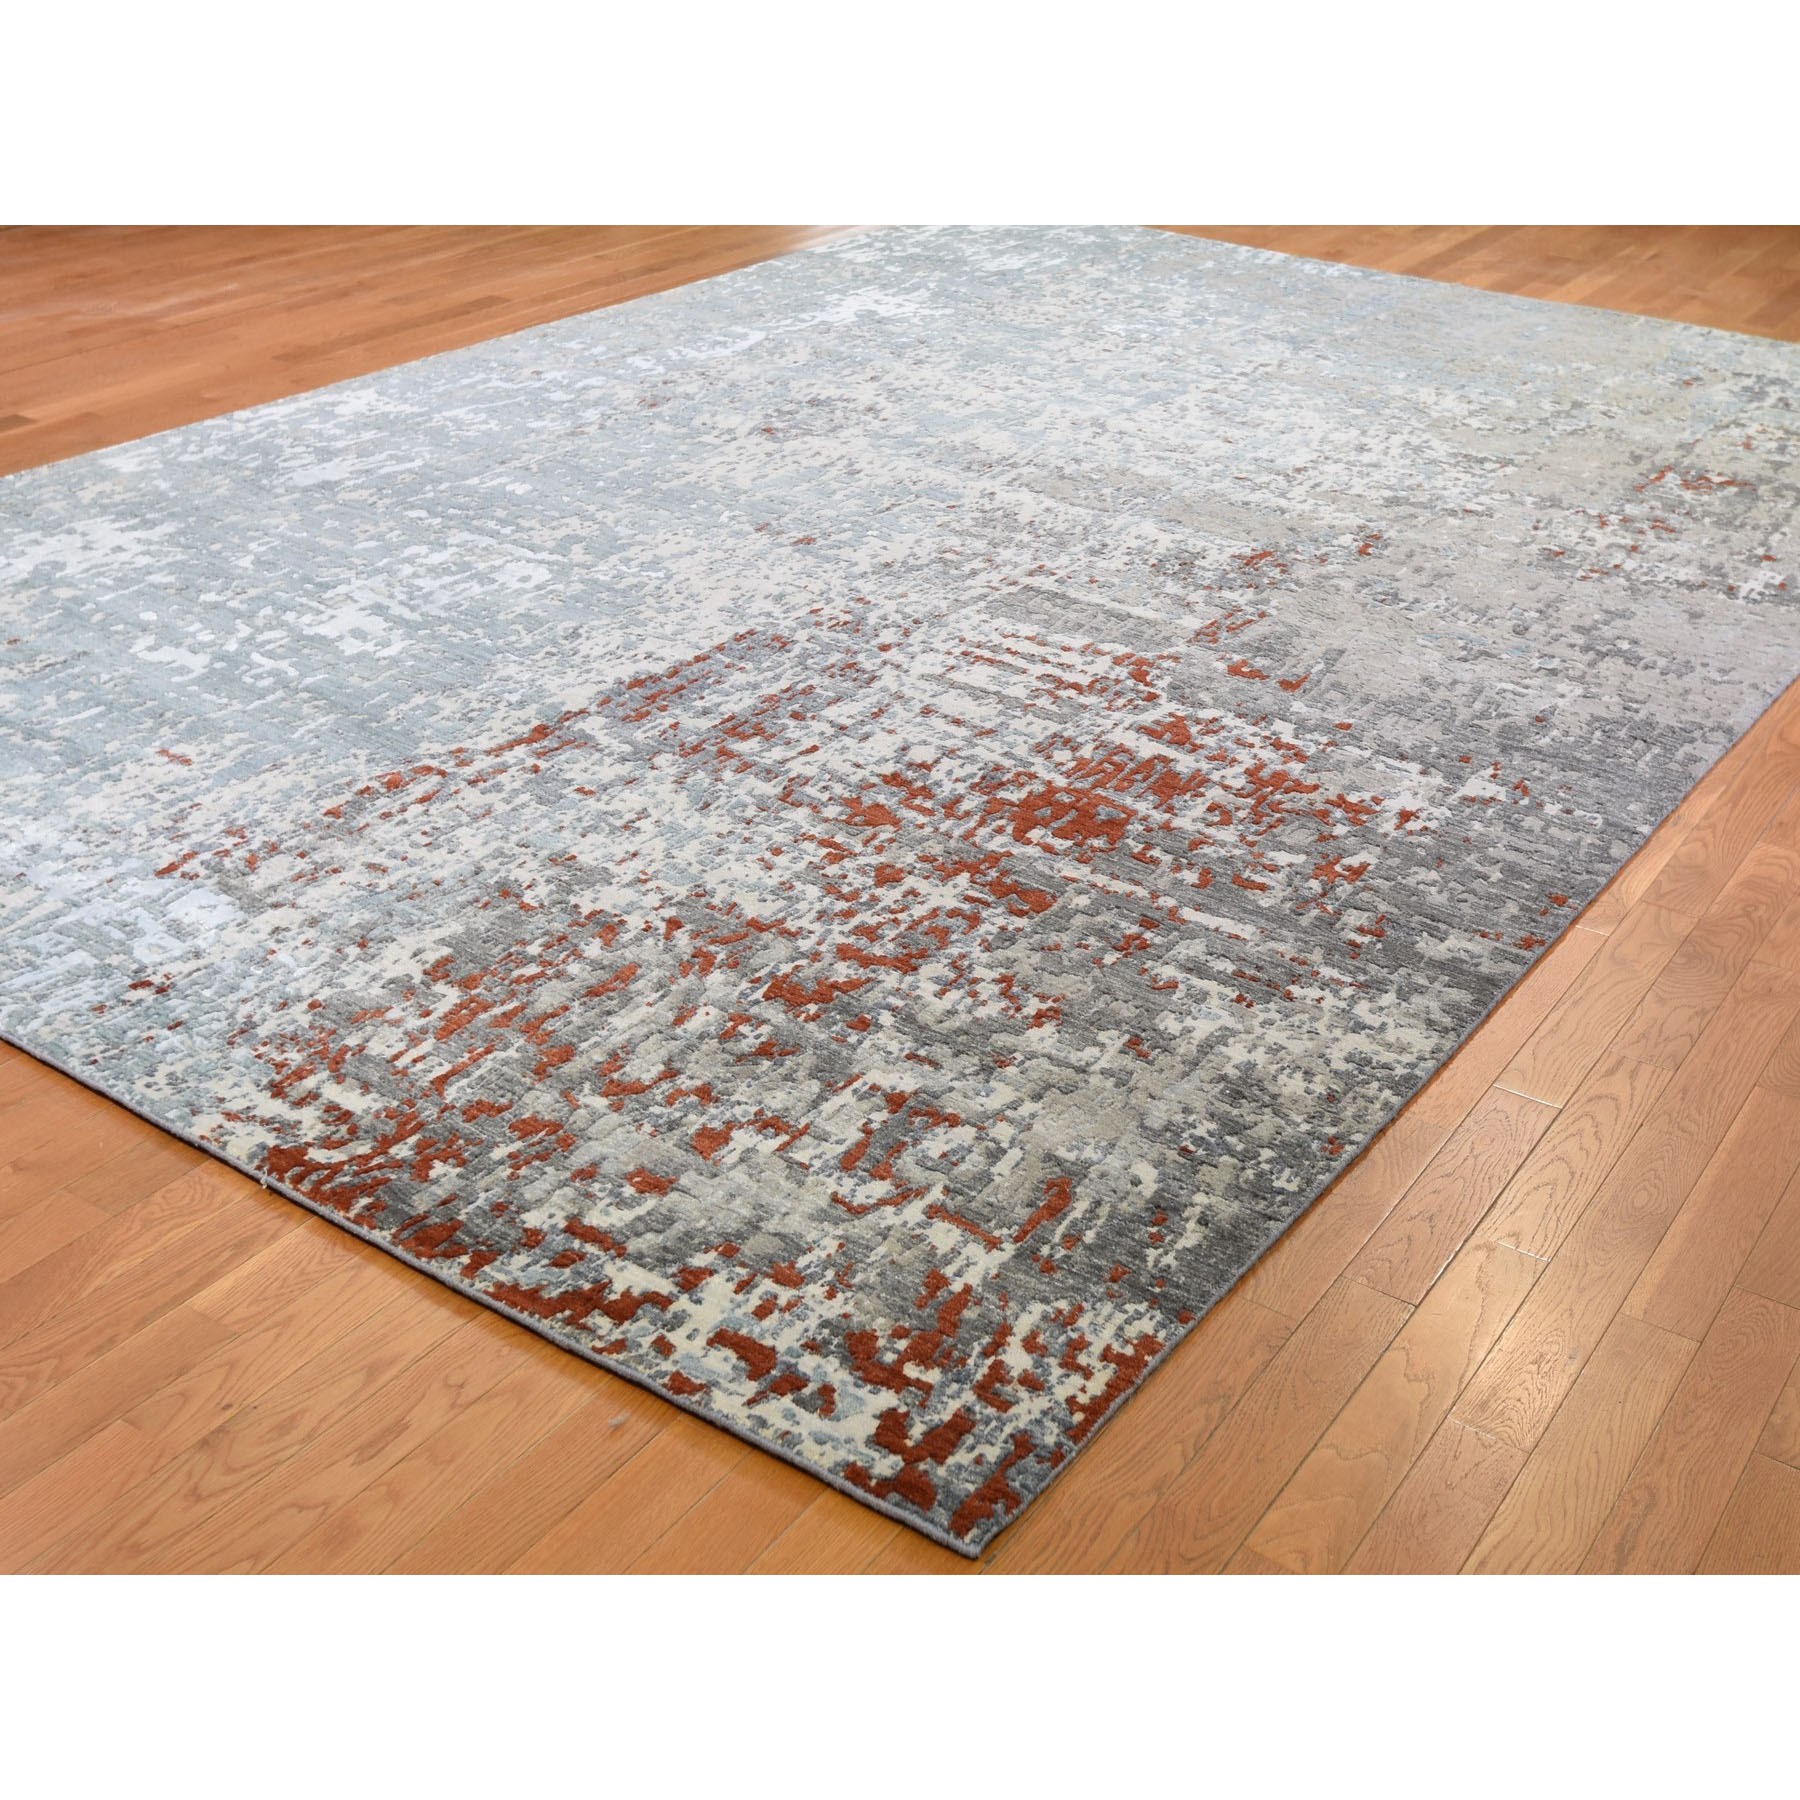 9-10 x14-7  Terracotta Abstract Design Wool and Silk Hi-Low Pile Denser Weave Hand Knotted Oriental Rug 